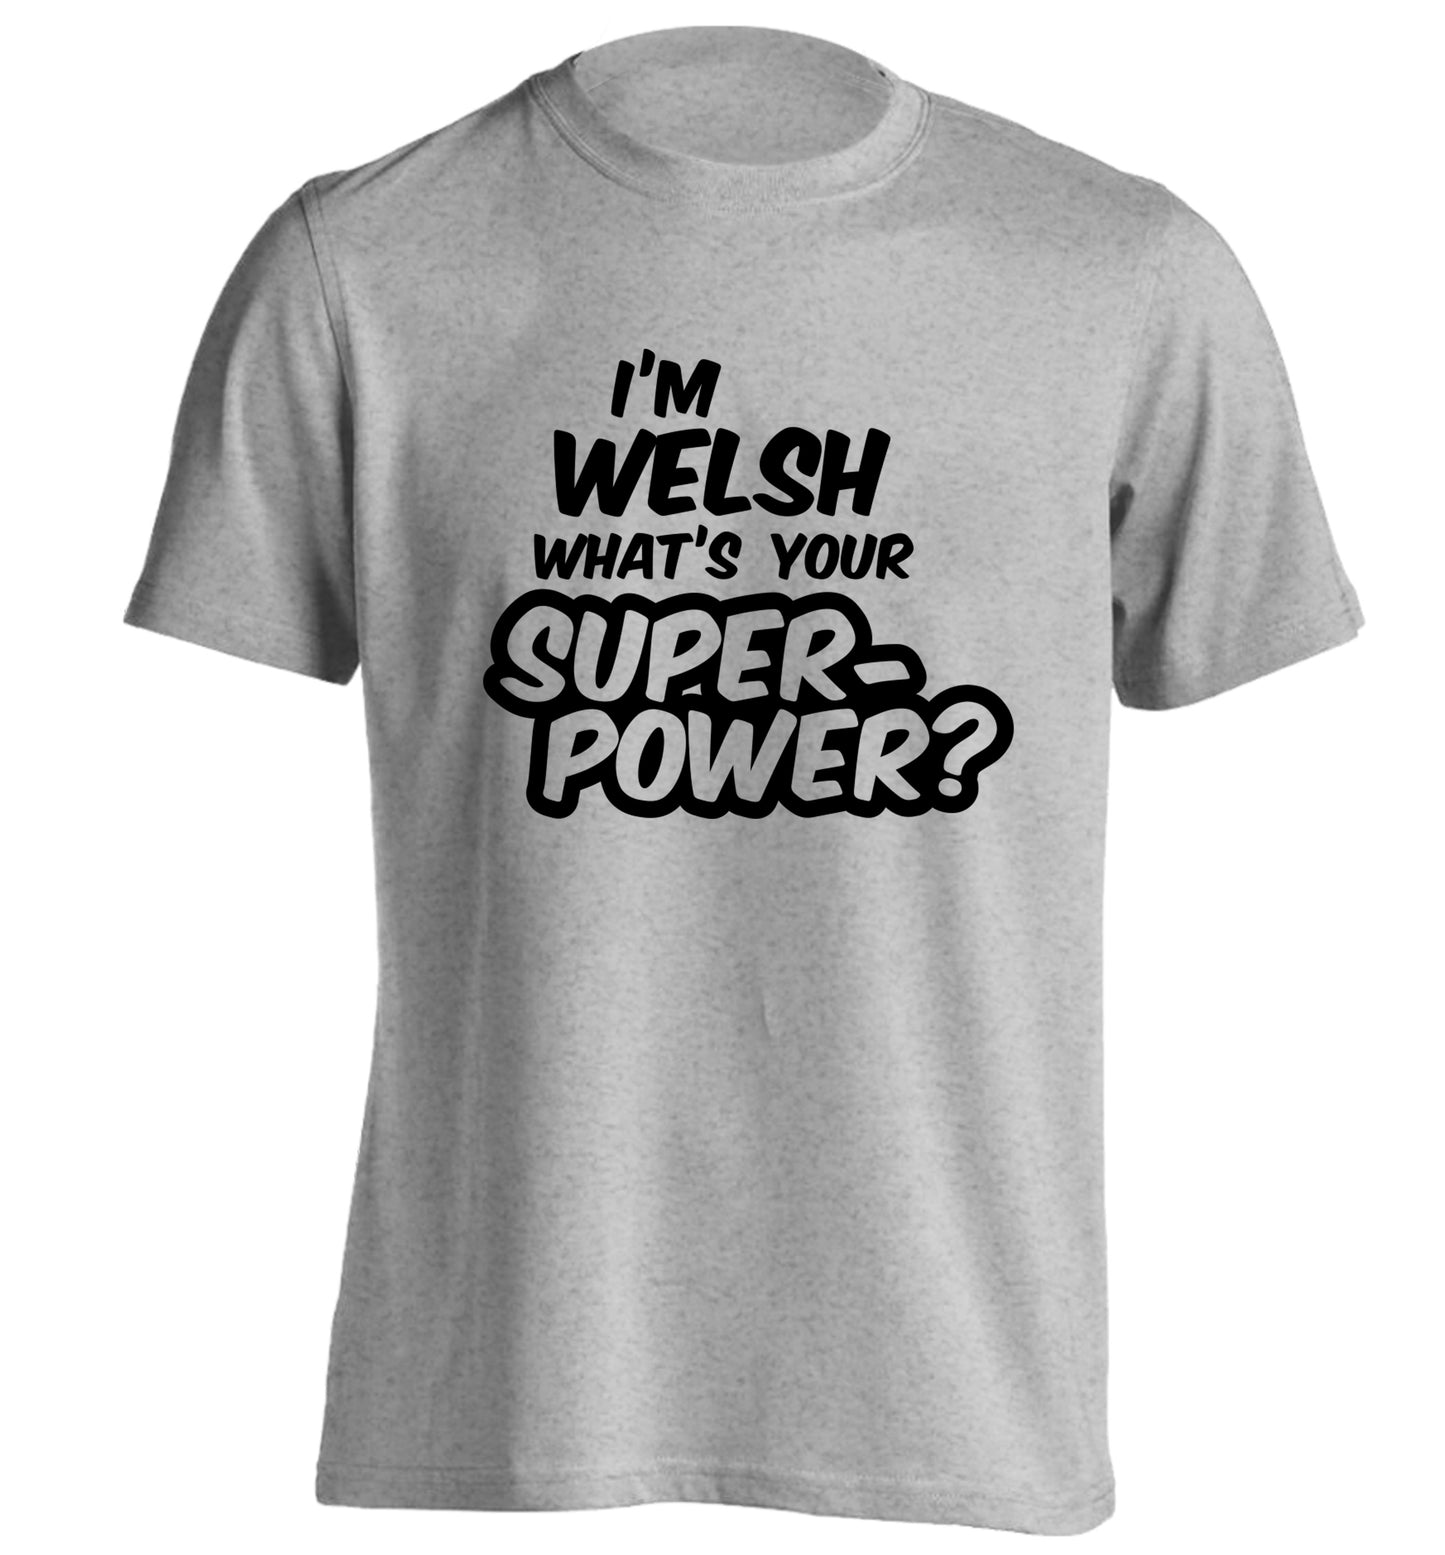 I'm Welsh what's your superpower? adults unisex grey Tshirt 2XL